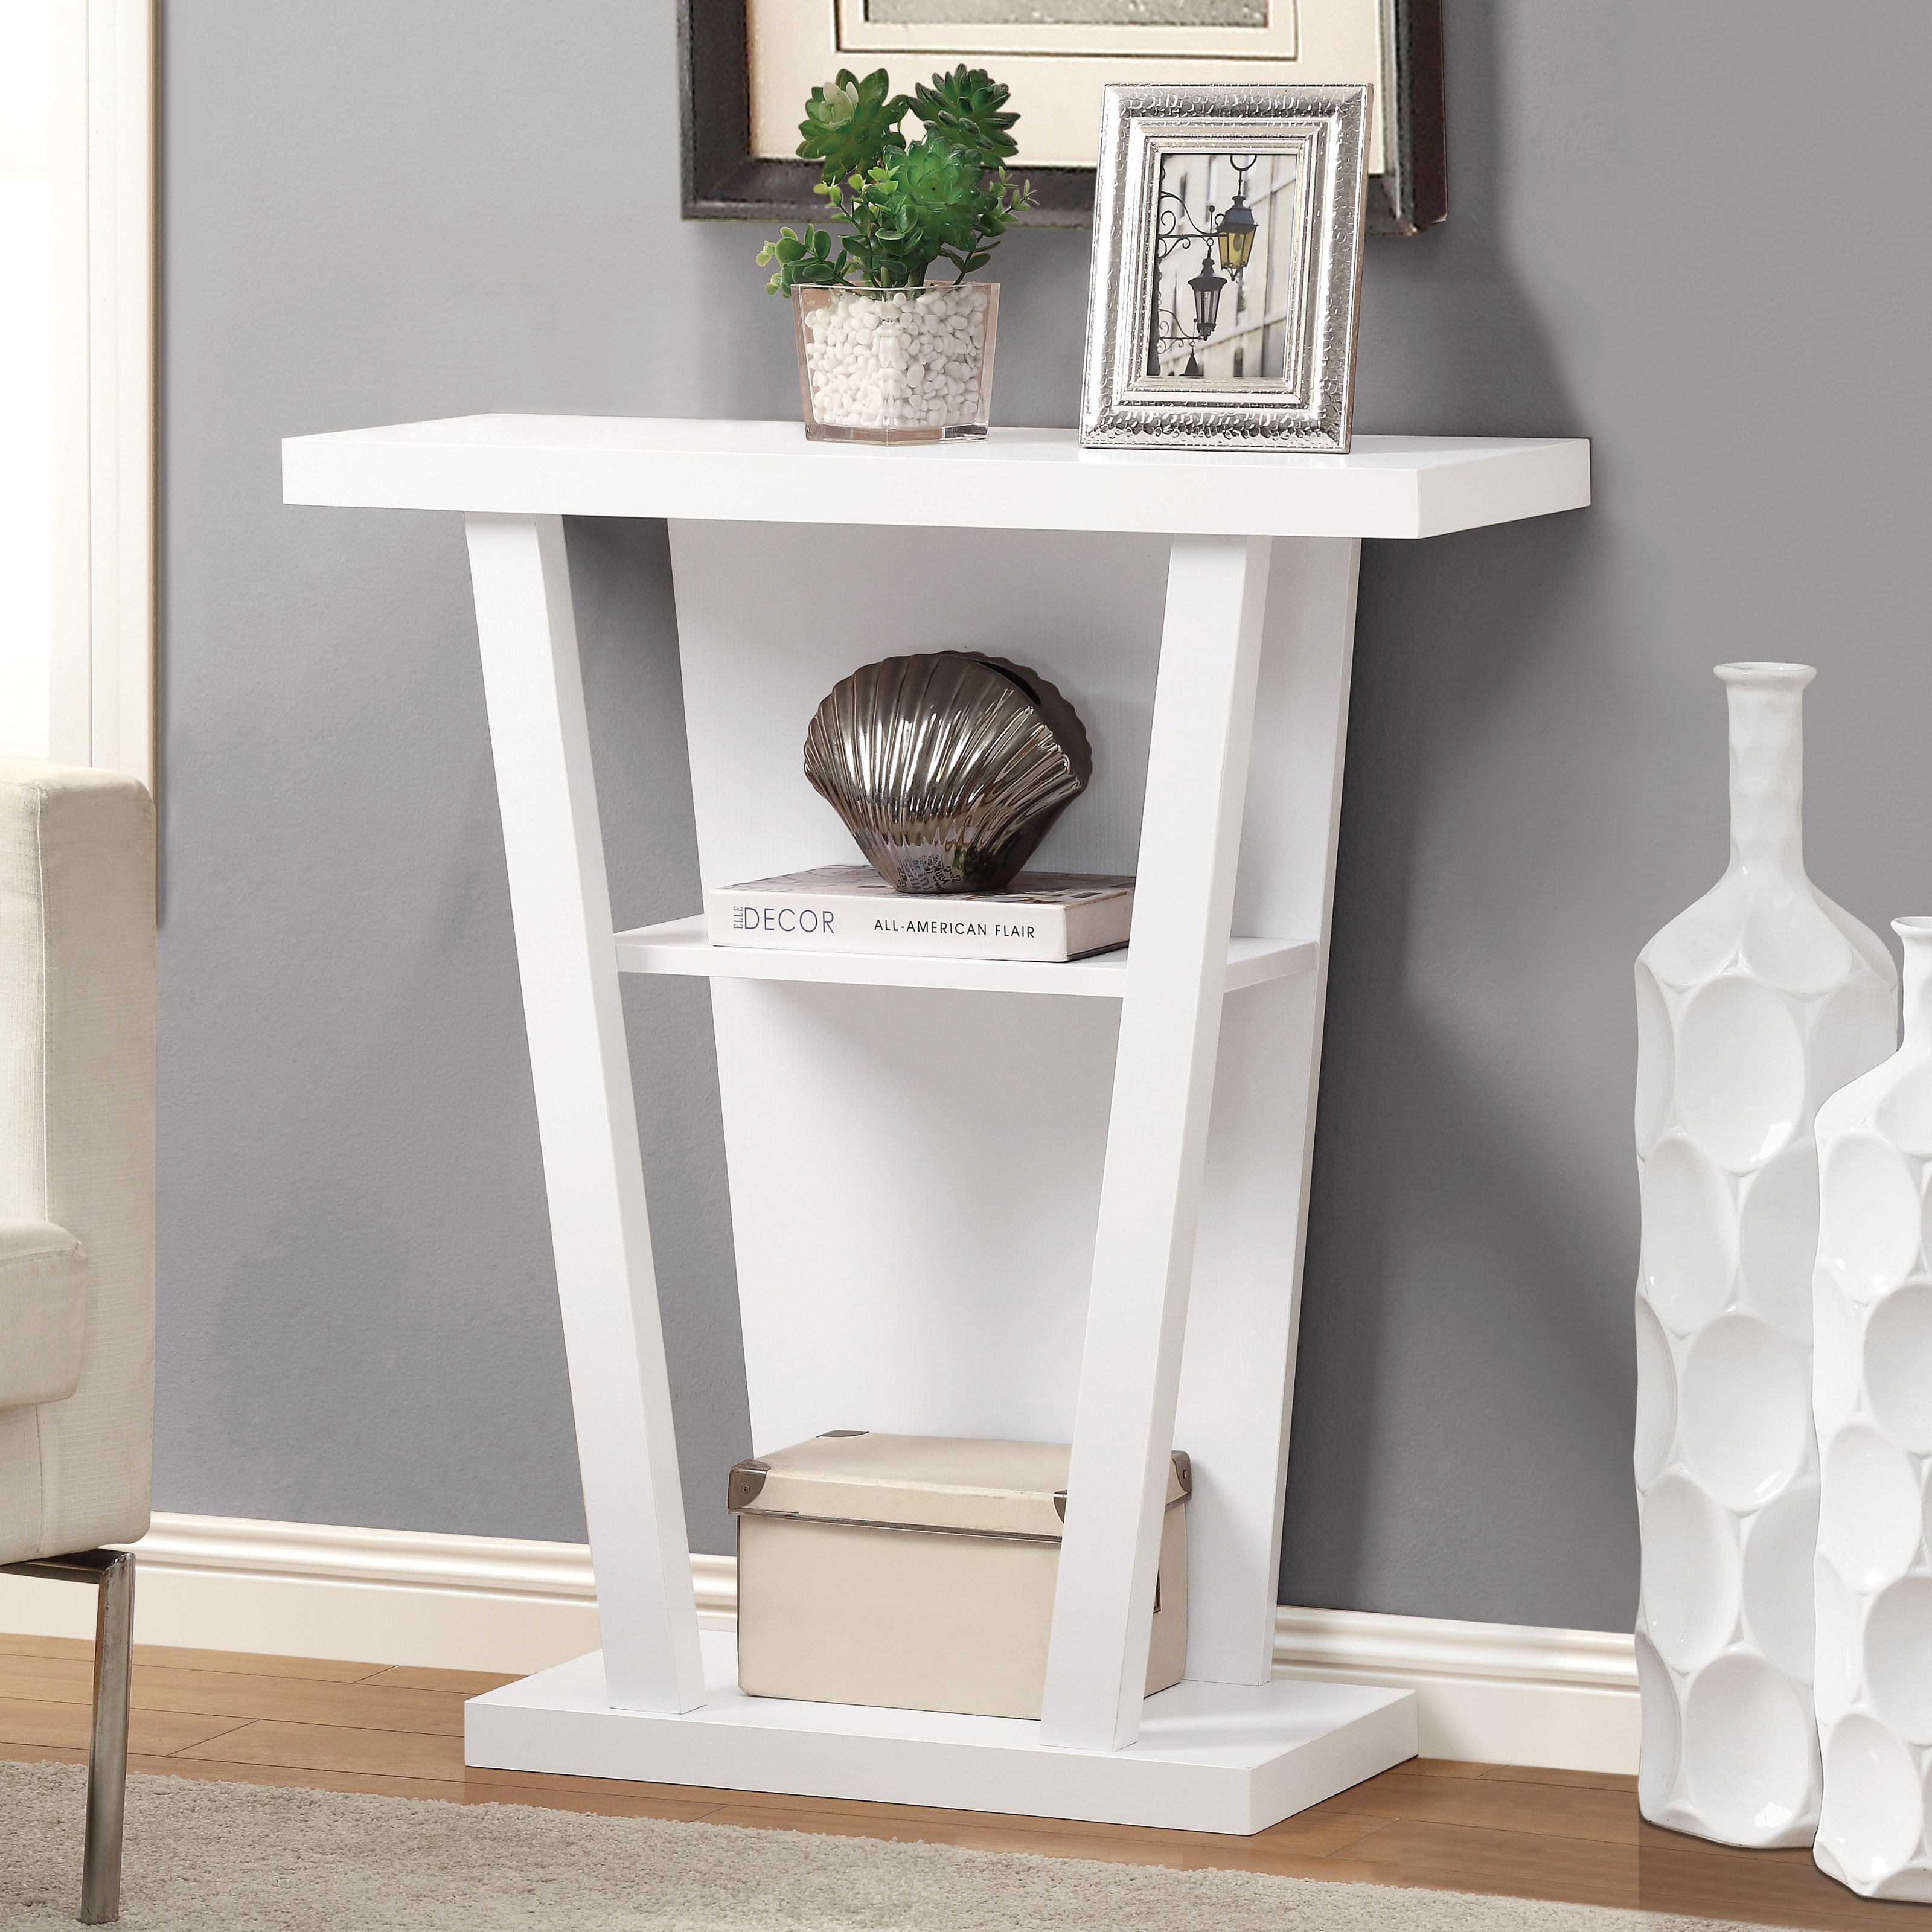 monarch hall console accent table white master black rug outdoor bbq grill target sleeper sofa patio garden maple coffee teak wood dining commercial furniture iron bedside ikea